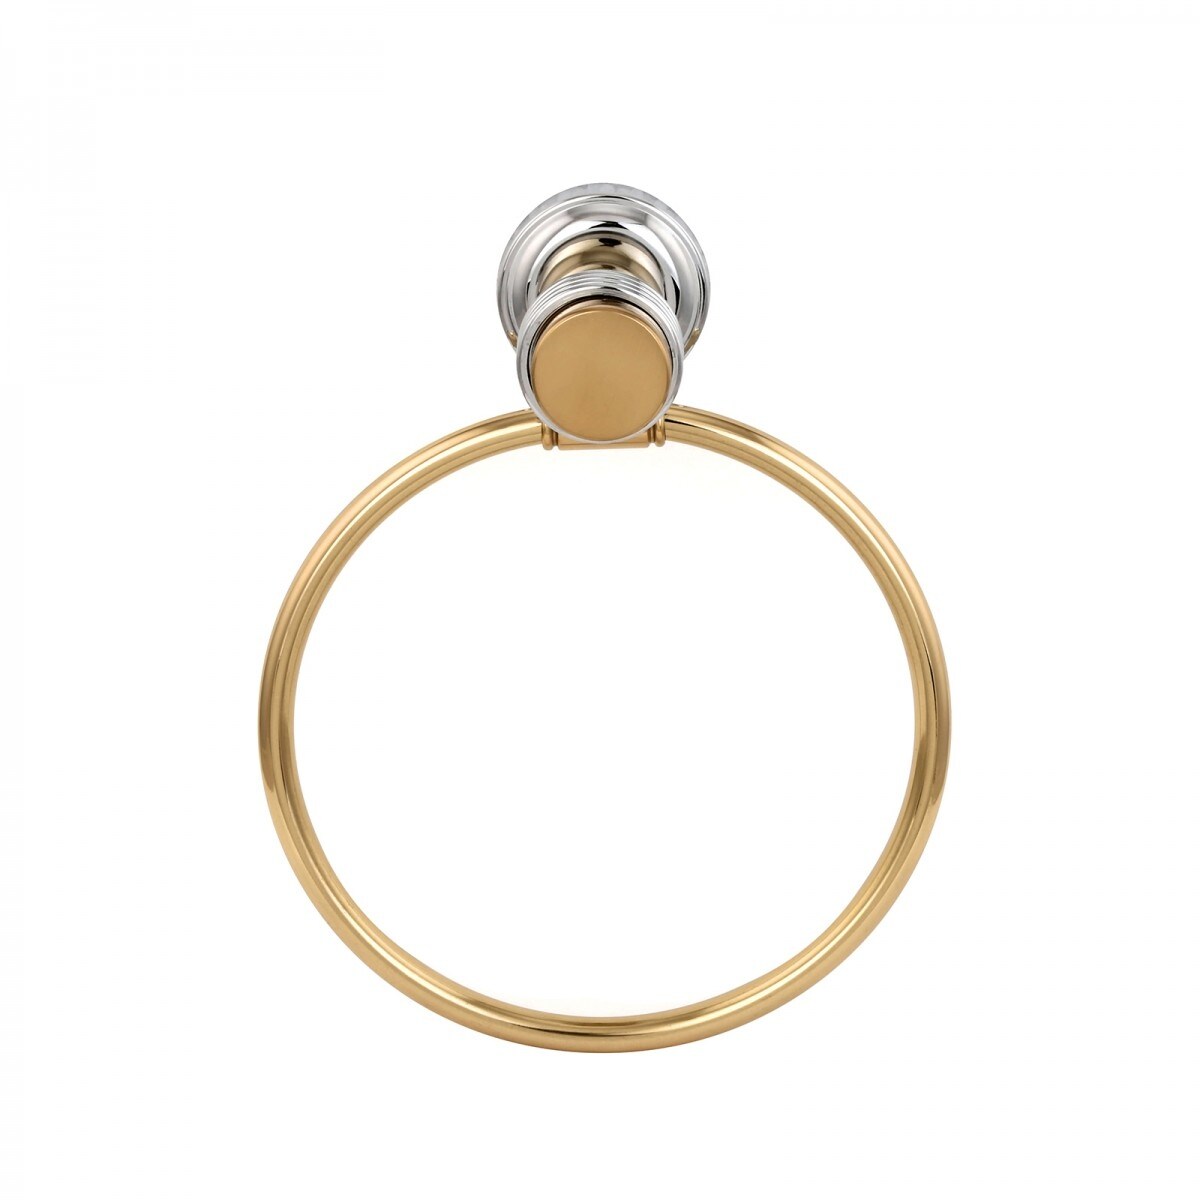 Brass Victorian Towel Ring / Directly From Manufacturer / Screws Included /  SUPER SAVER DEAL Till the Stock Lasts Hurry 